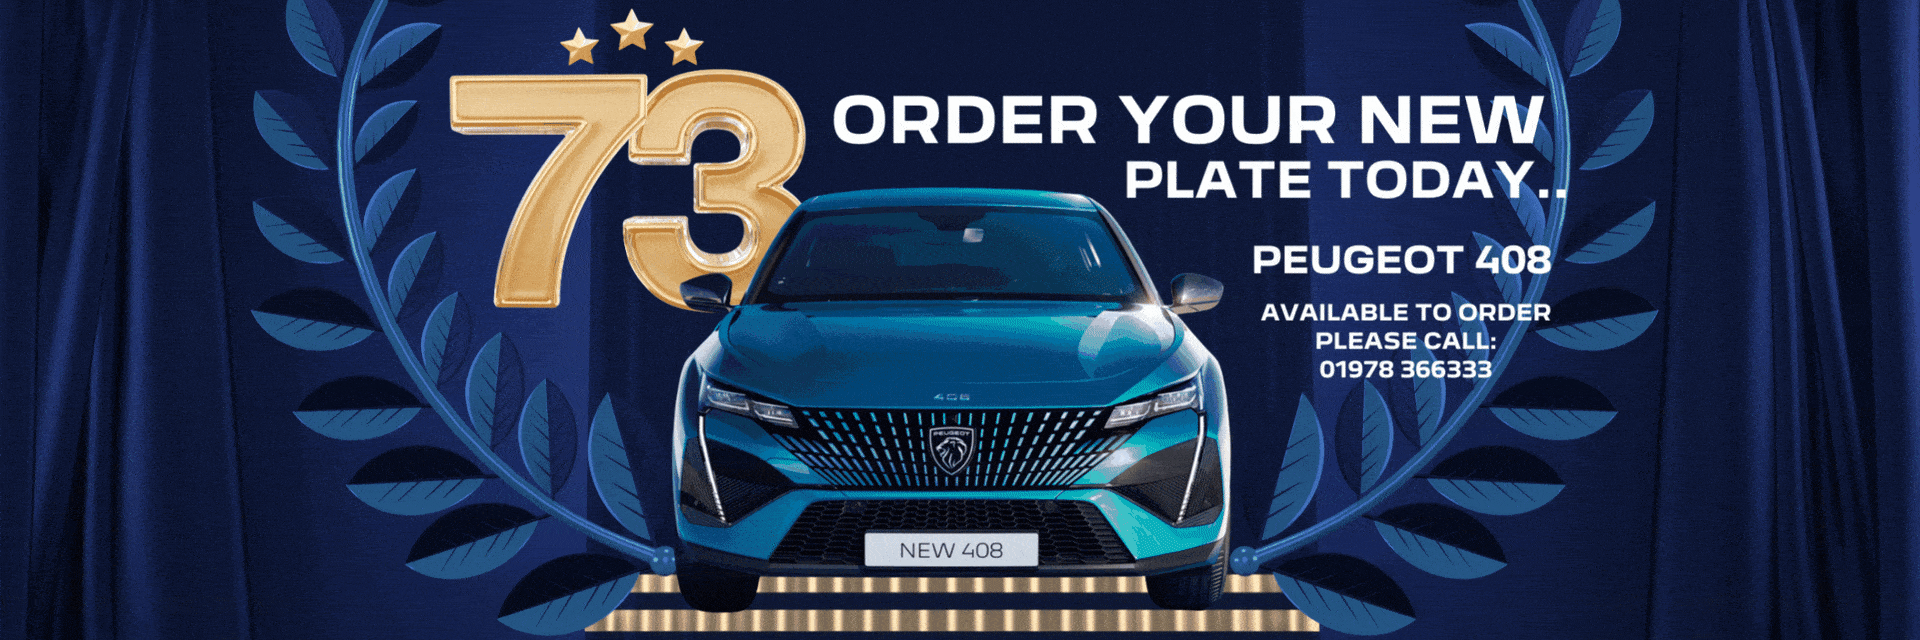 ORDER YOUR NEW 73 PLATE TODAY.